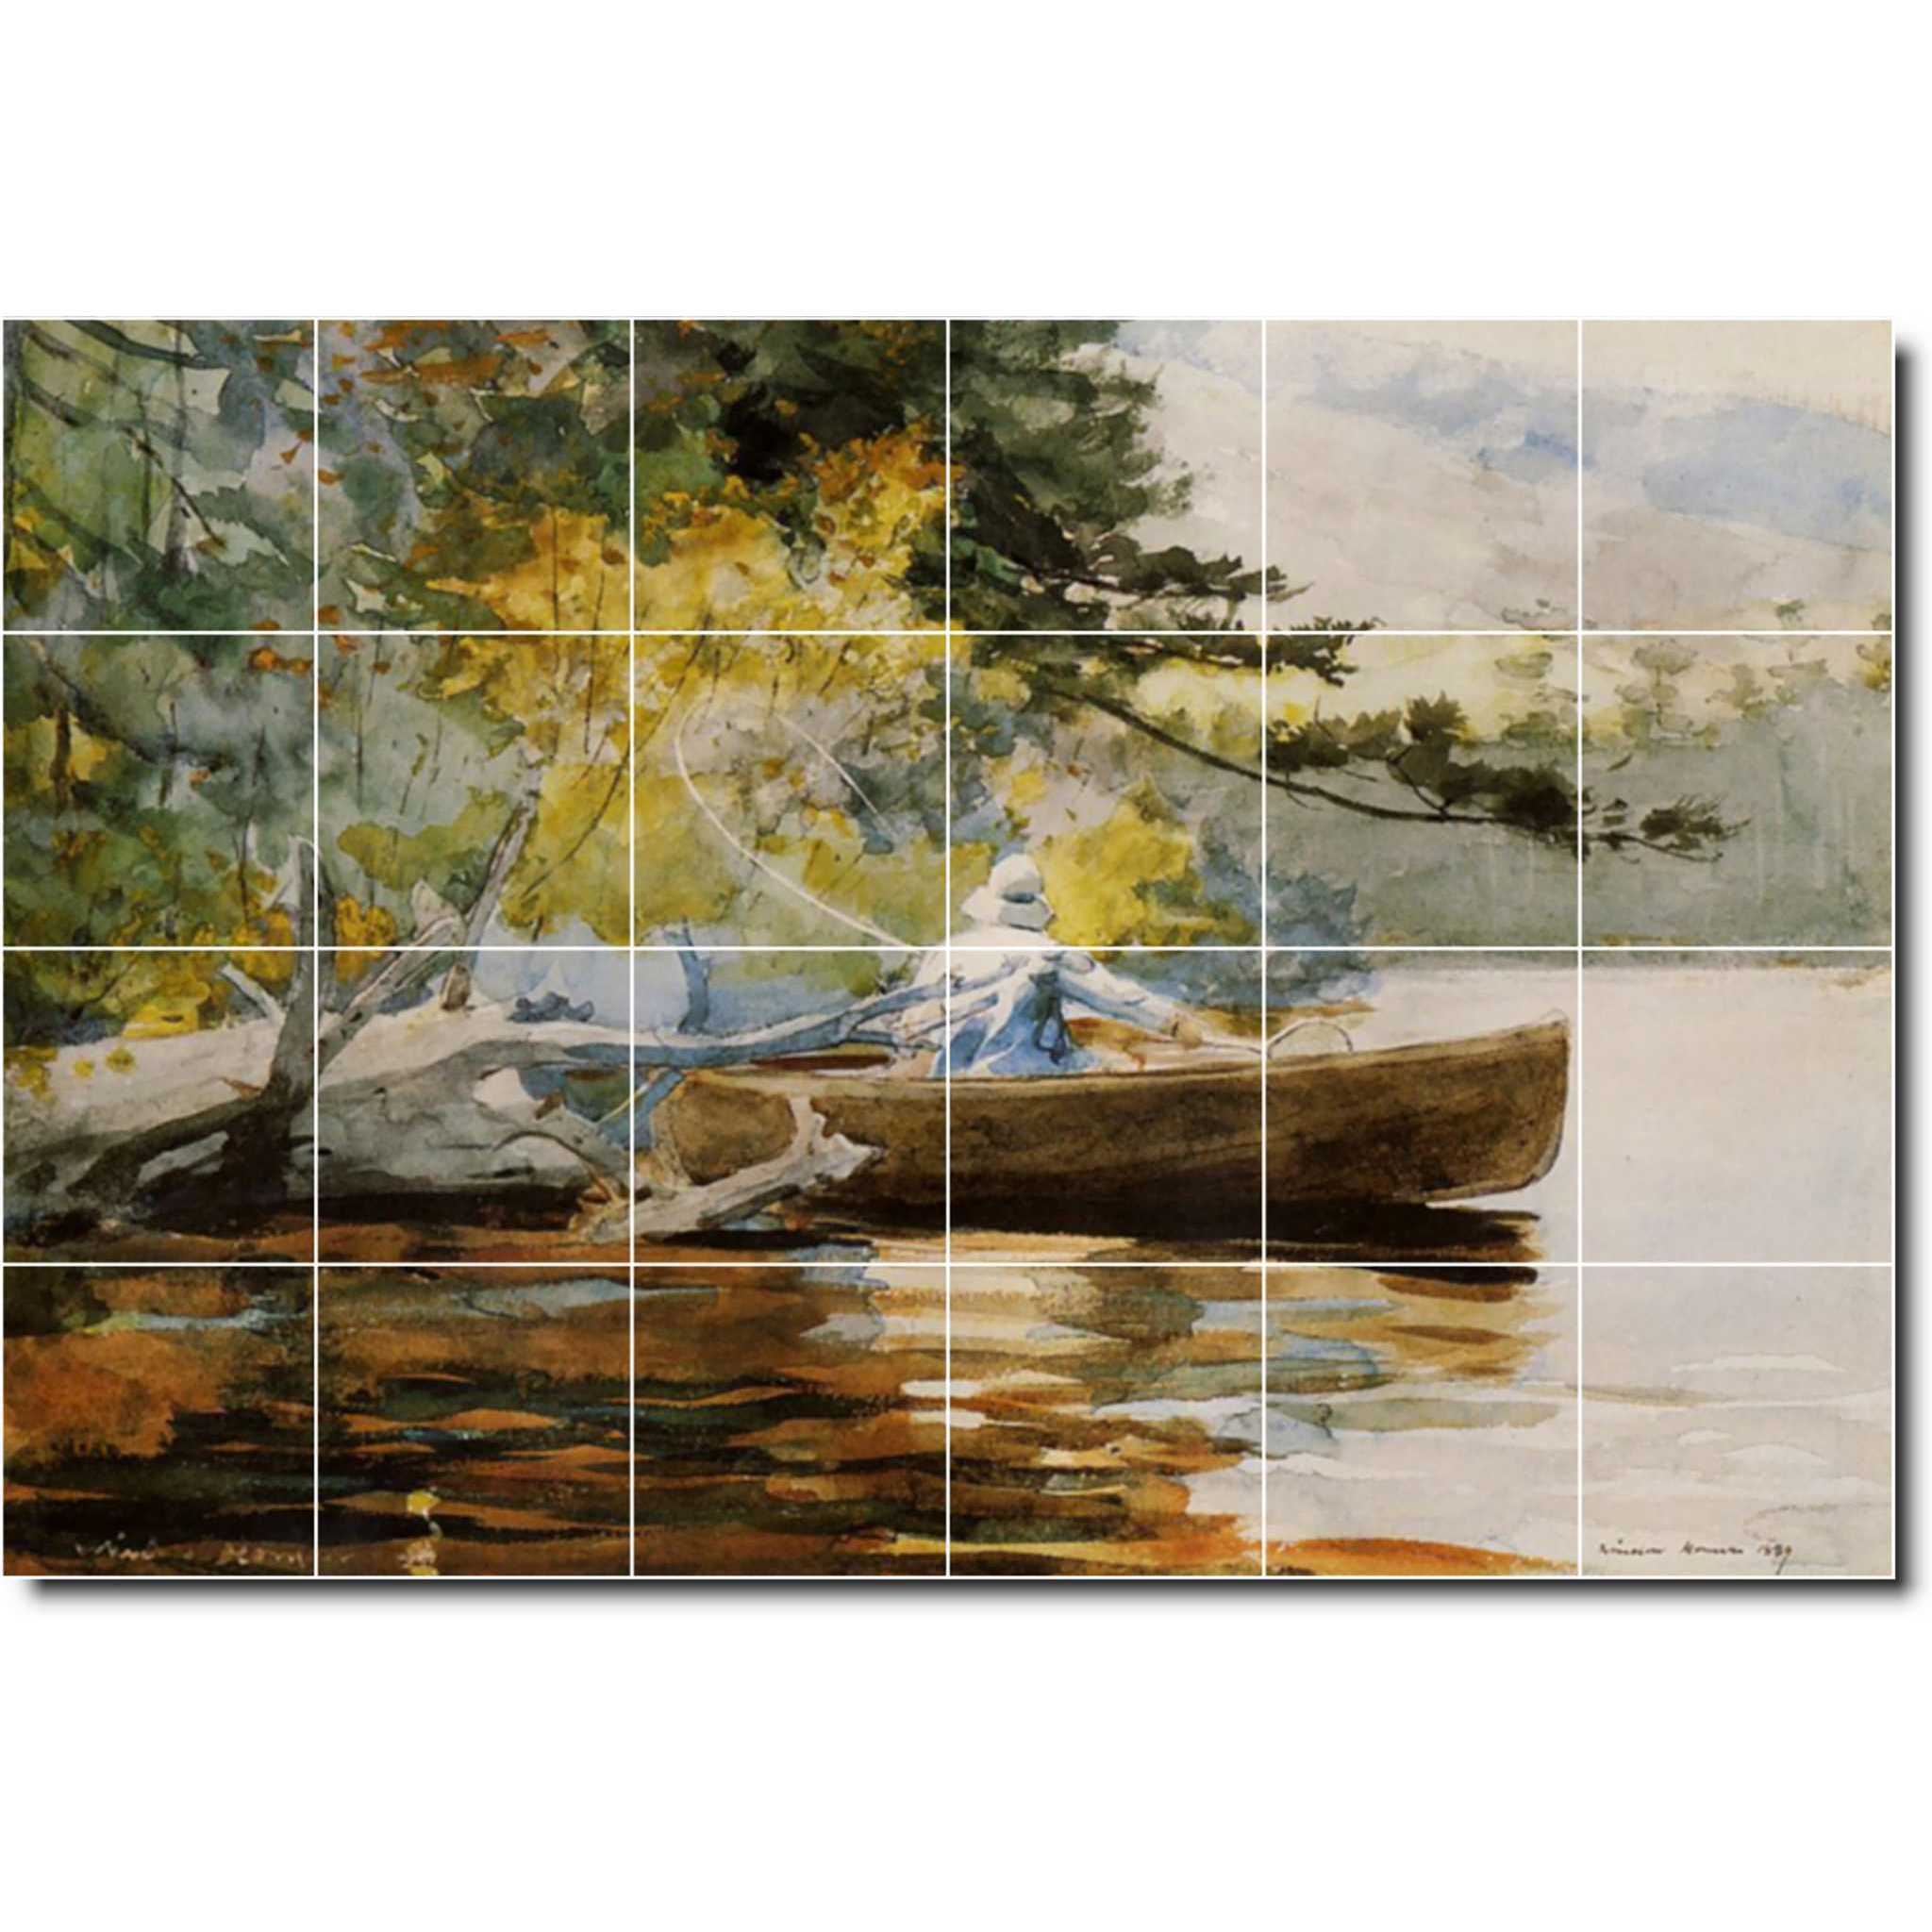 Winslow Homer Country Painting Ceramic Tile Mural P04319-XL. 72"W x 48"H (24) 12x12 tiles